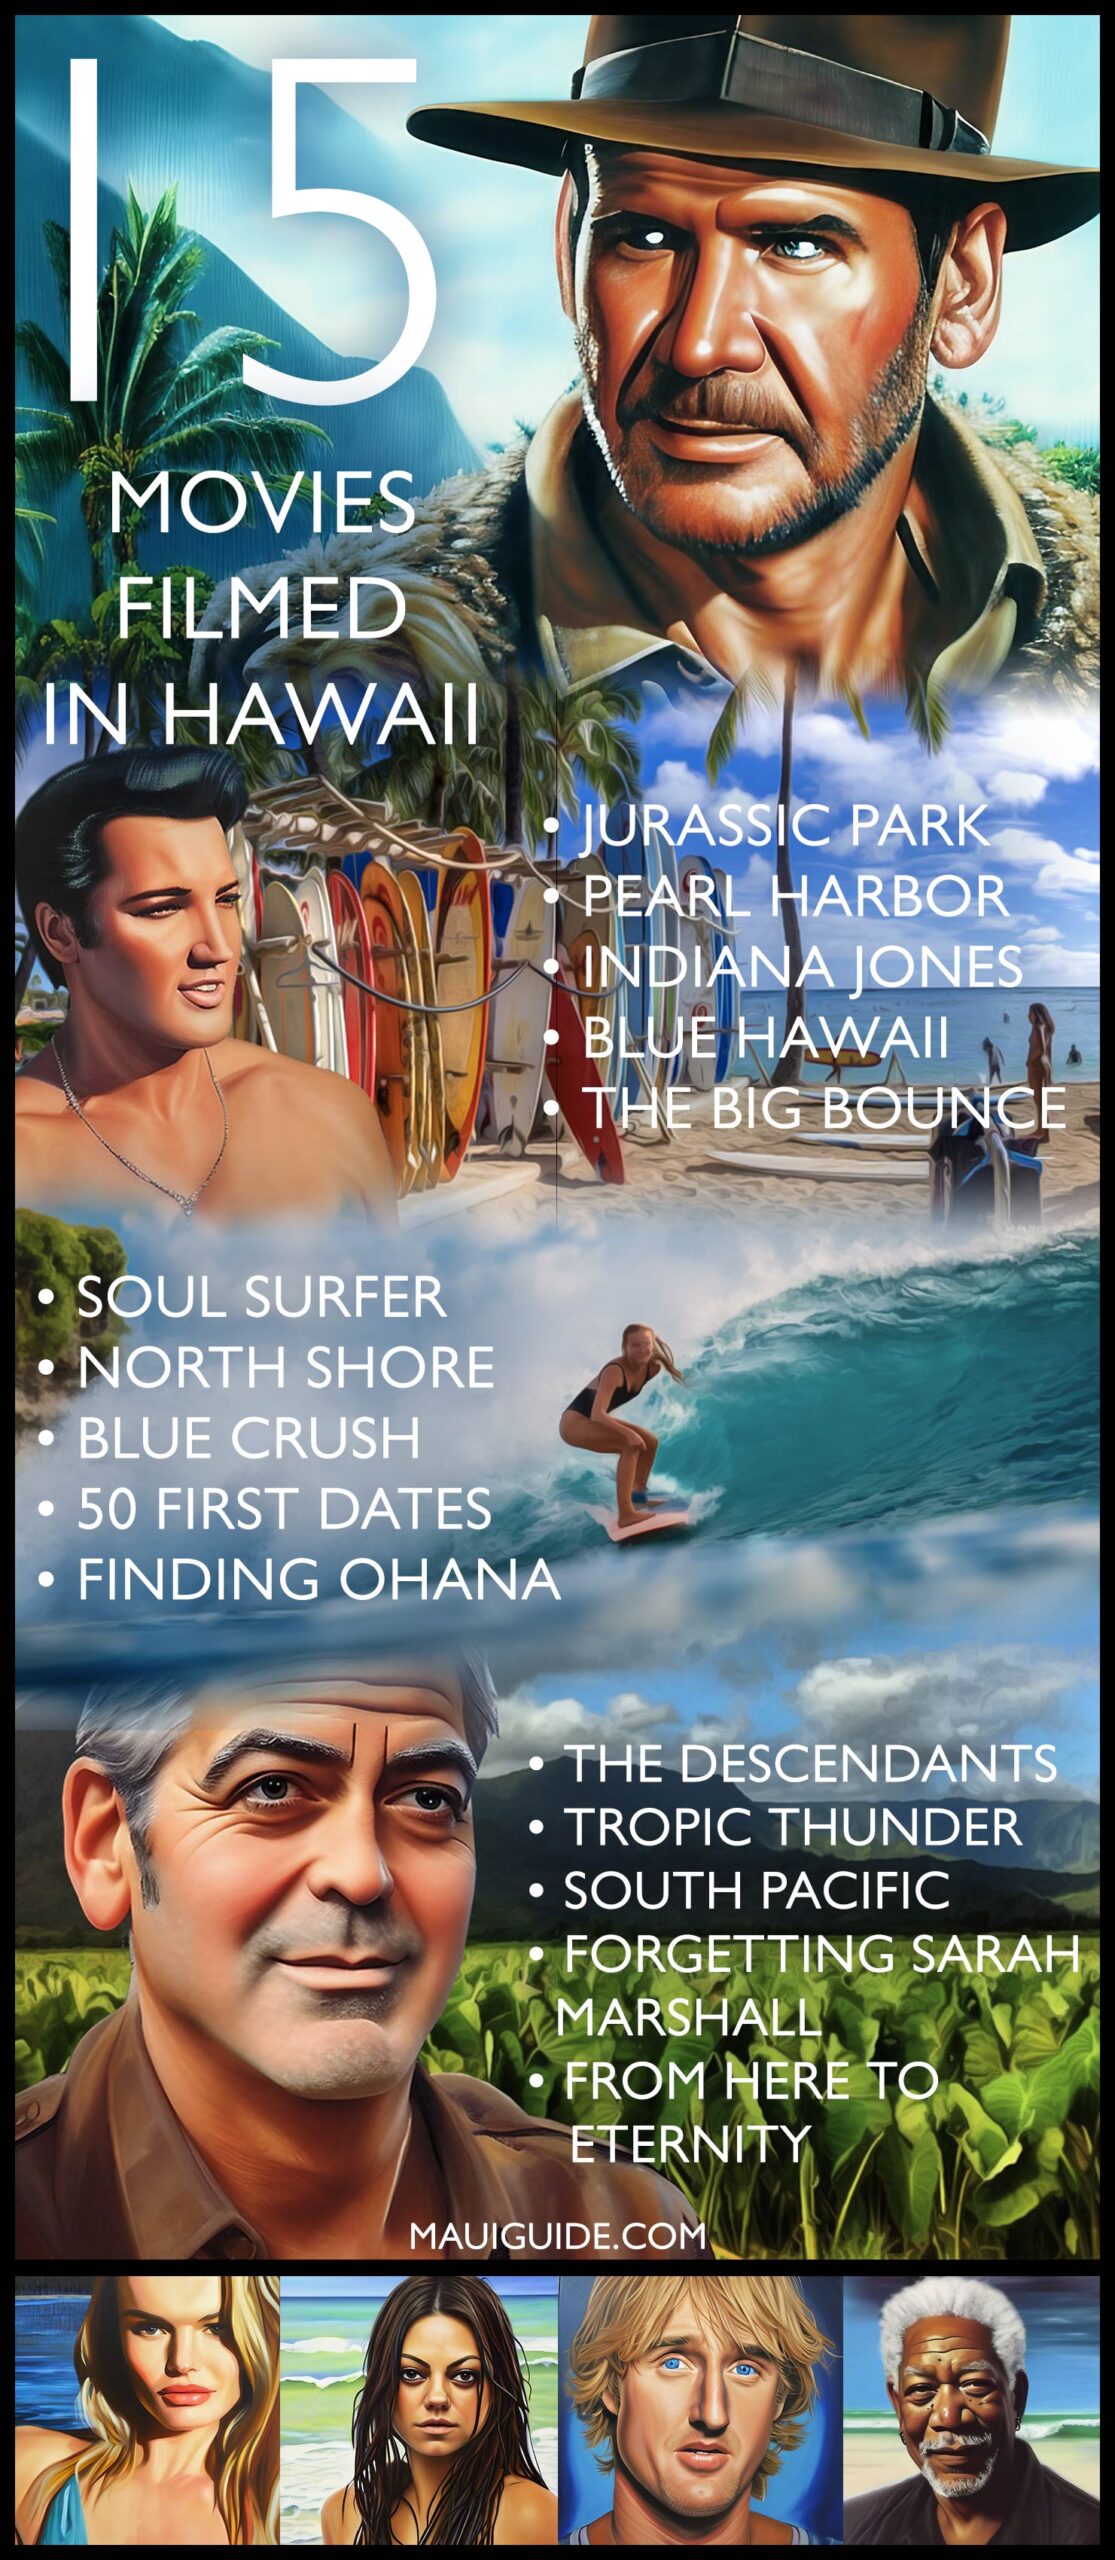 Films and Movies made in Hawaii